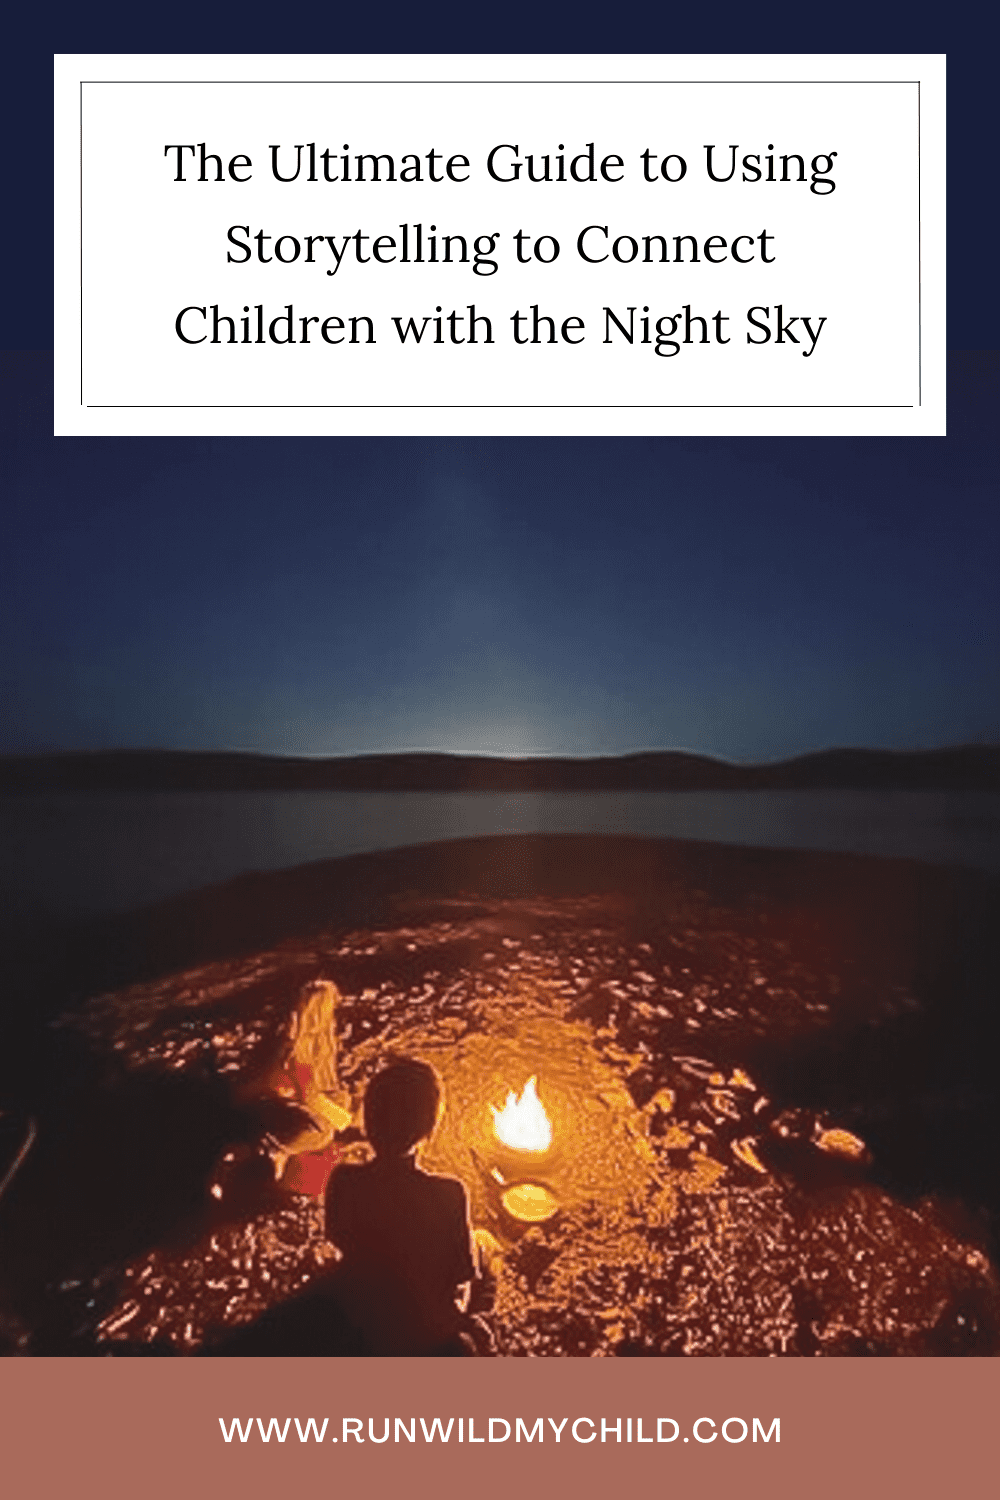 Kids telling stories around a campfire while looking at the night sky.